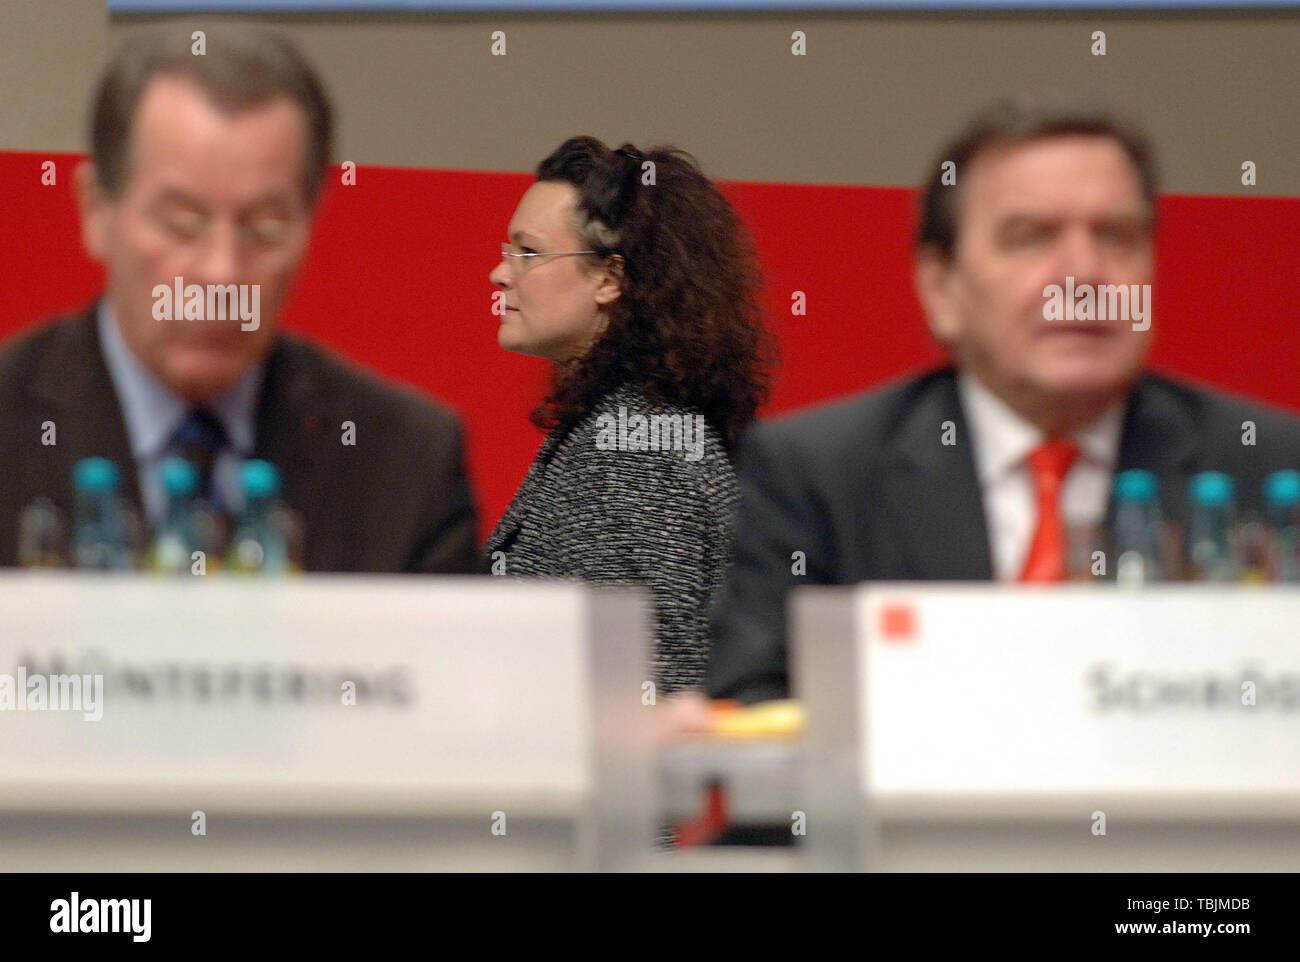 Karlsruhe, Germany. 14th Nov, 2005. Andrea Nahles (M), member of the SPD presidium, walks behind the then Federal Chancellor Gerhard Schröder (r) and the then SPD chairman Franz Müntefering at the SPD party conference. SPD party and faction leader Nahles resigns. Credit: Boris Roessler/dpa/Alamy Live News Stock Photo